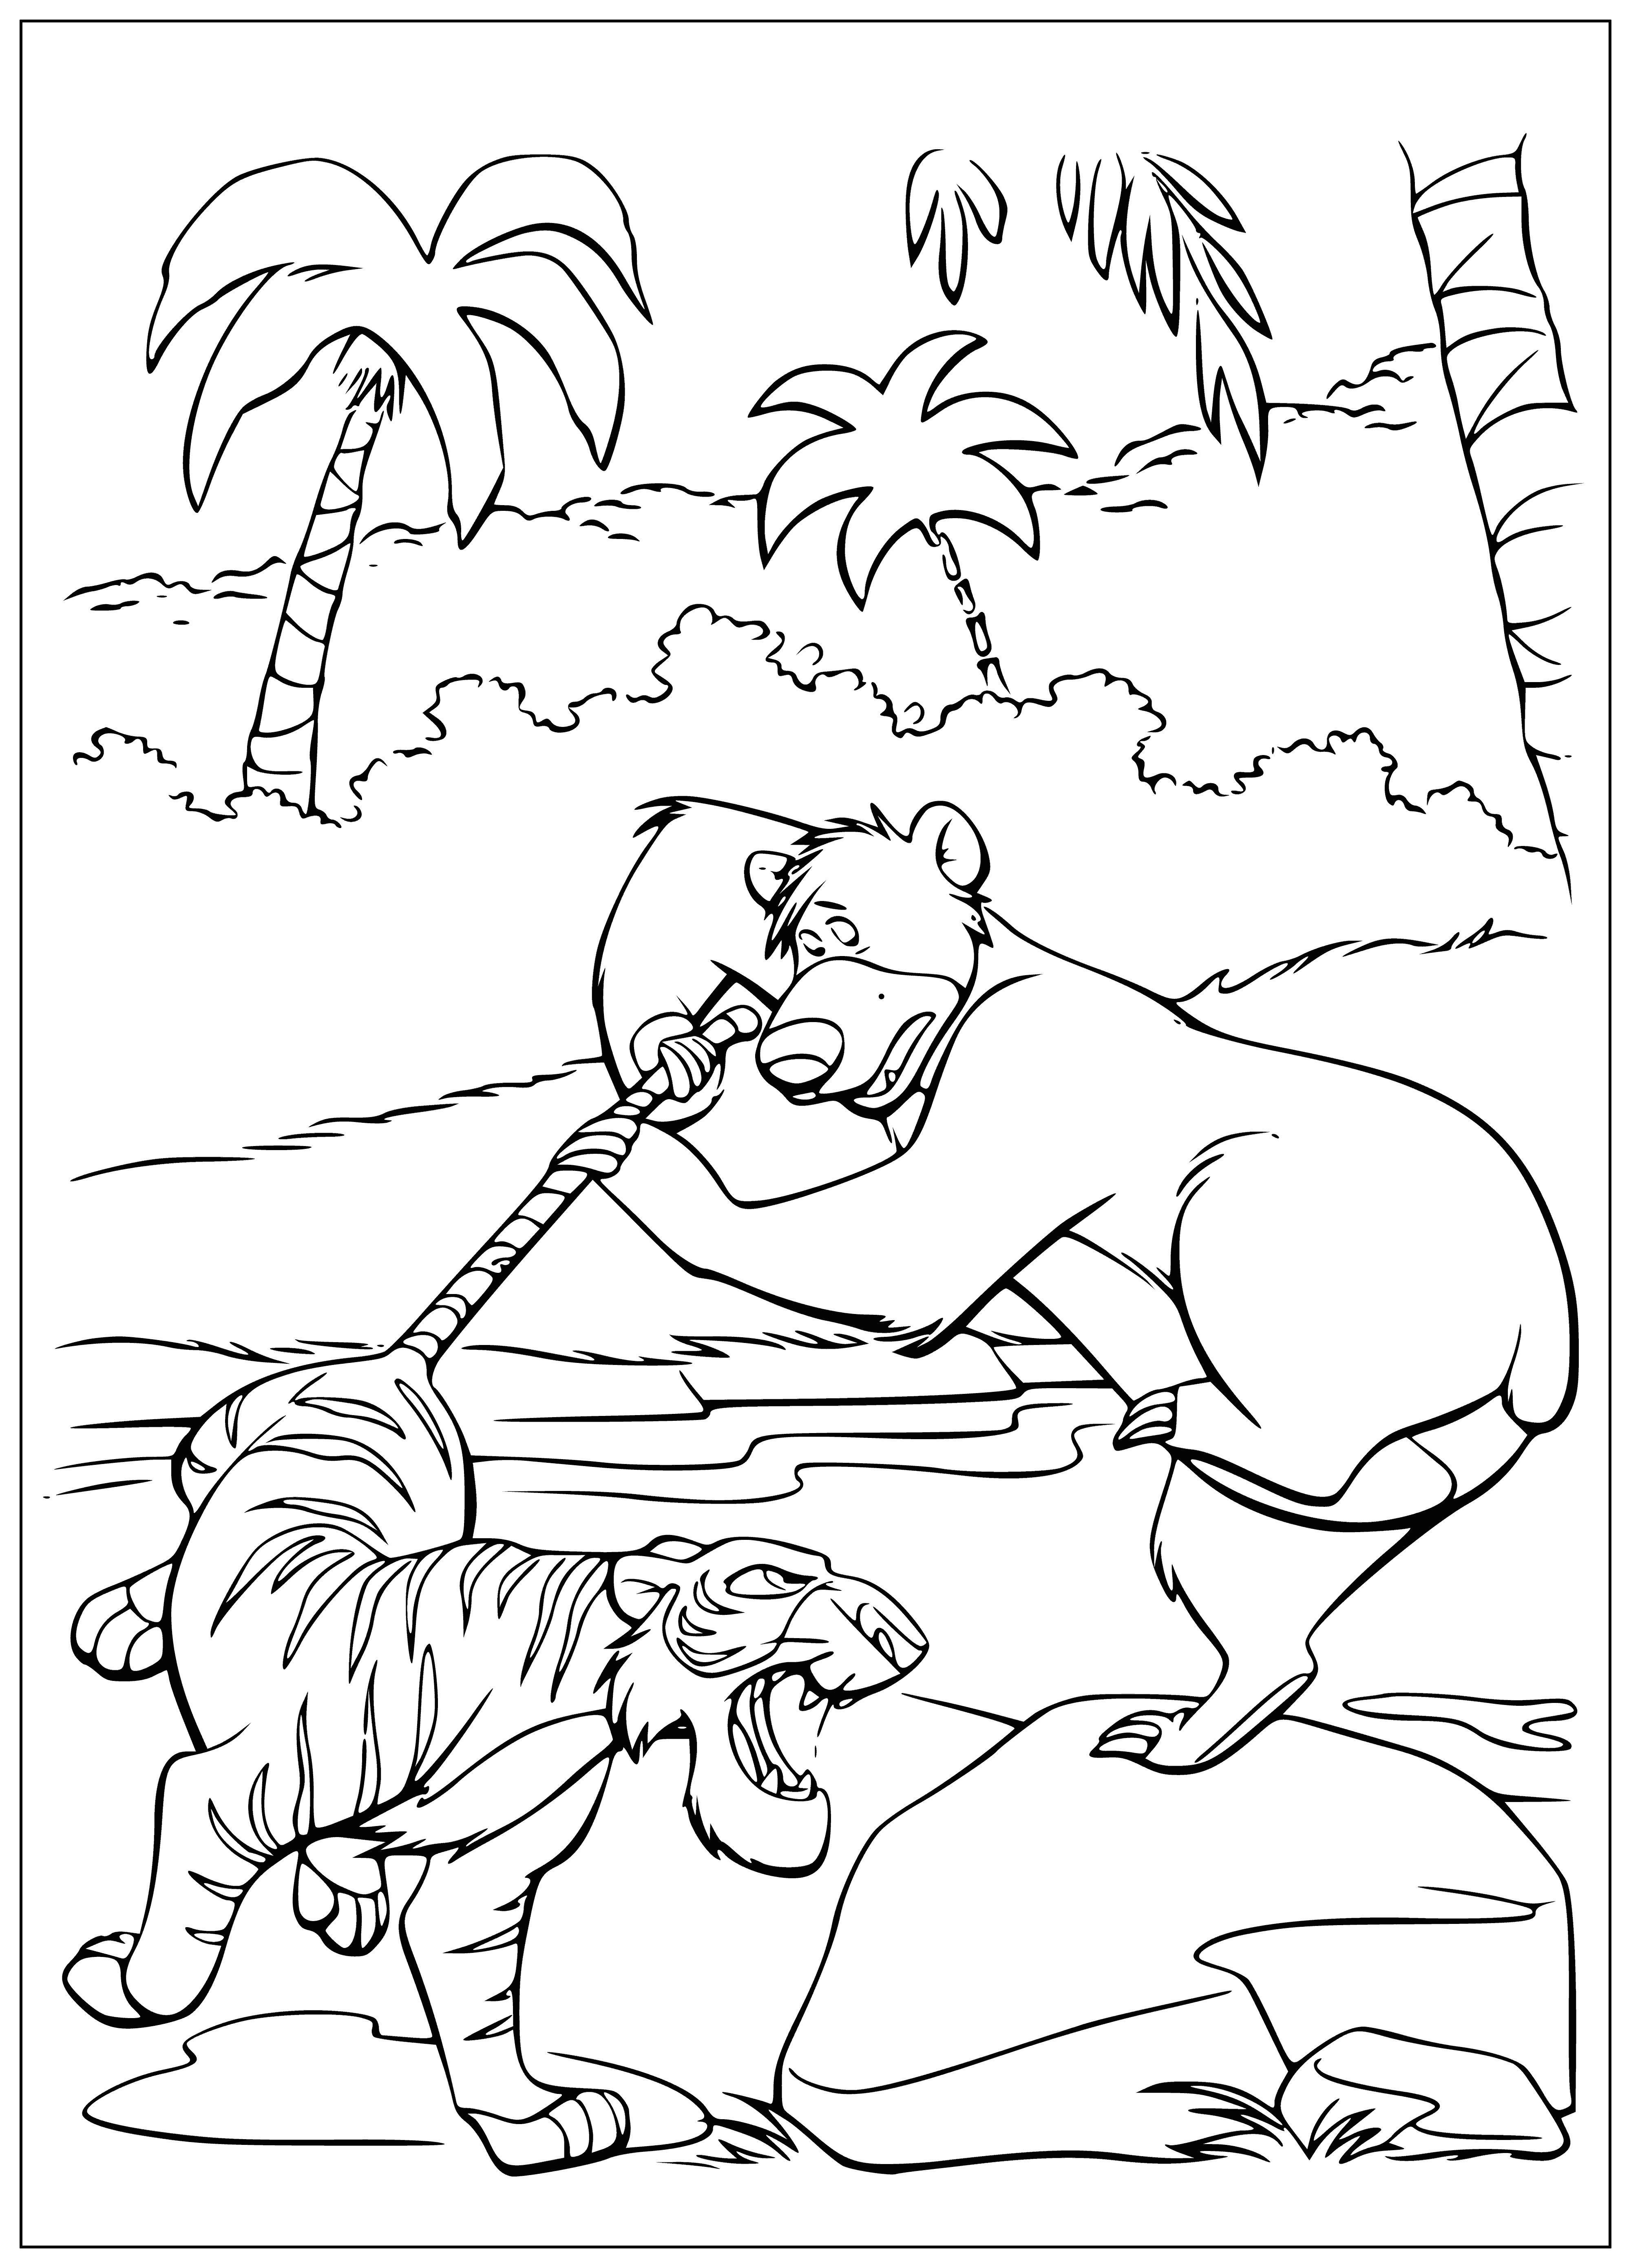 coloring page: A yellow-orange bird sits on a brown branch in a jungle under dark skies; its open beak and black stripes make it stand out.